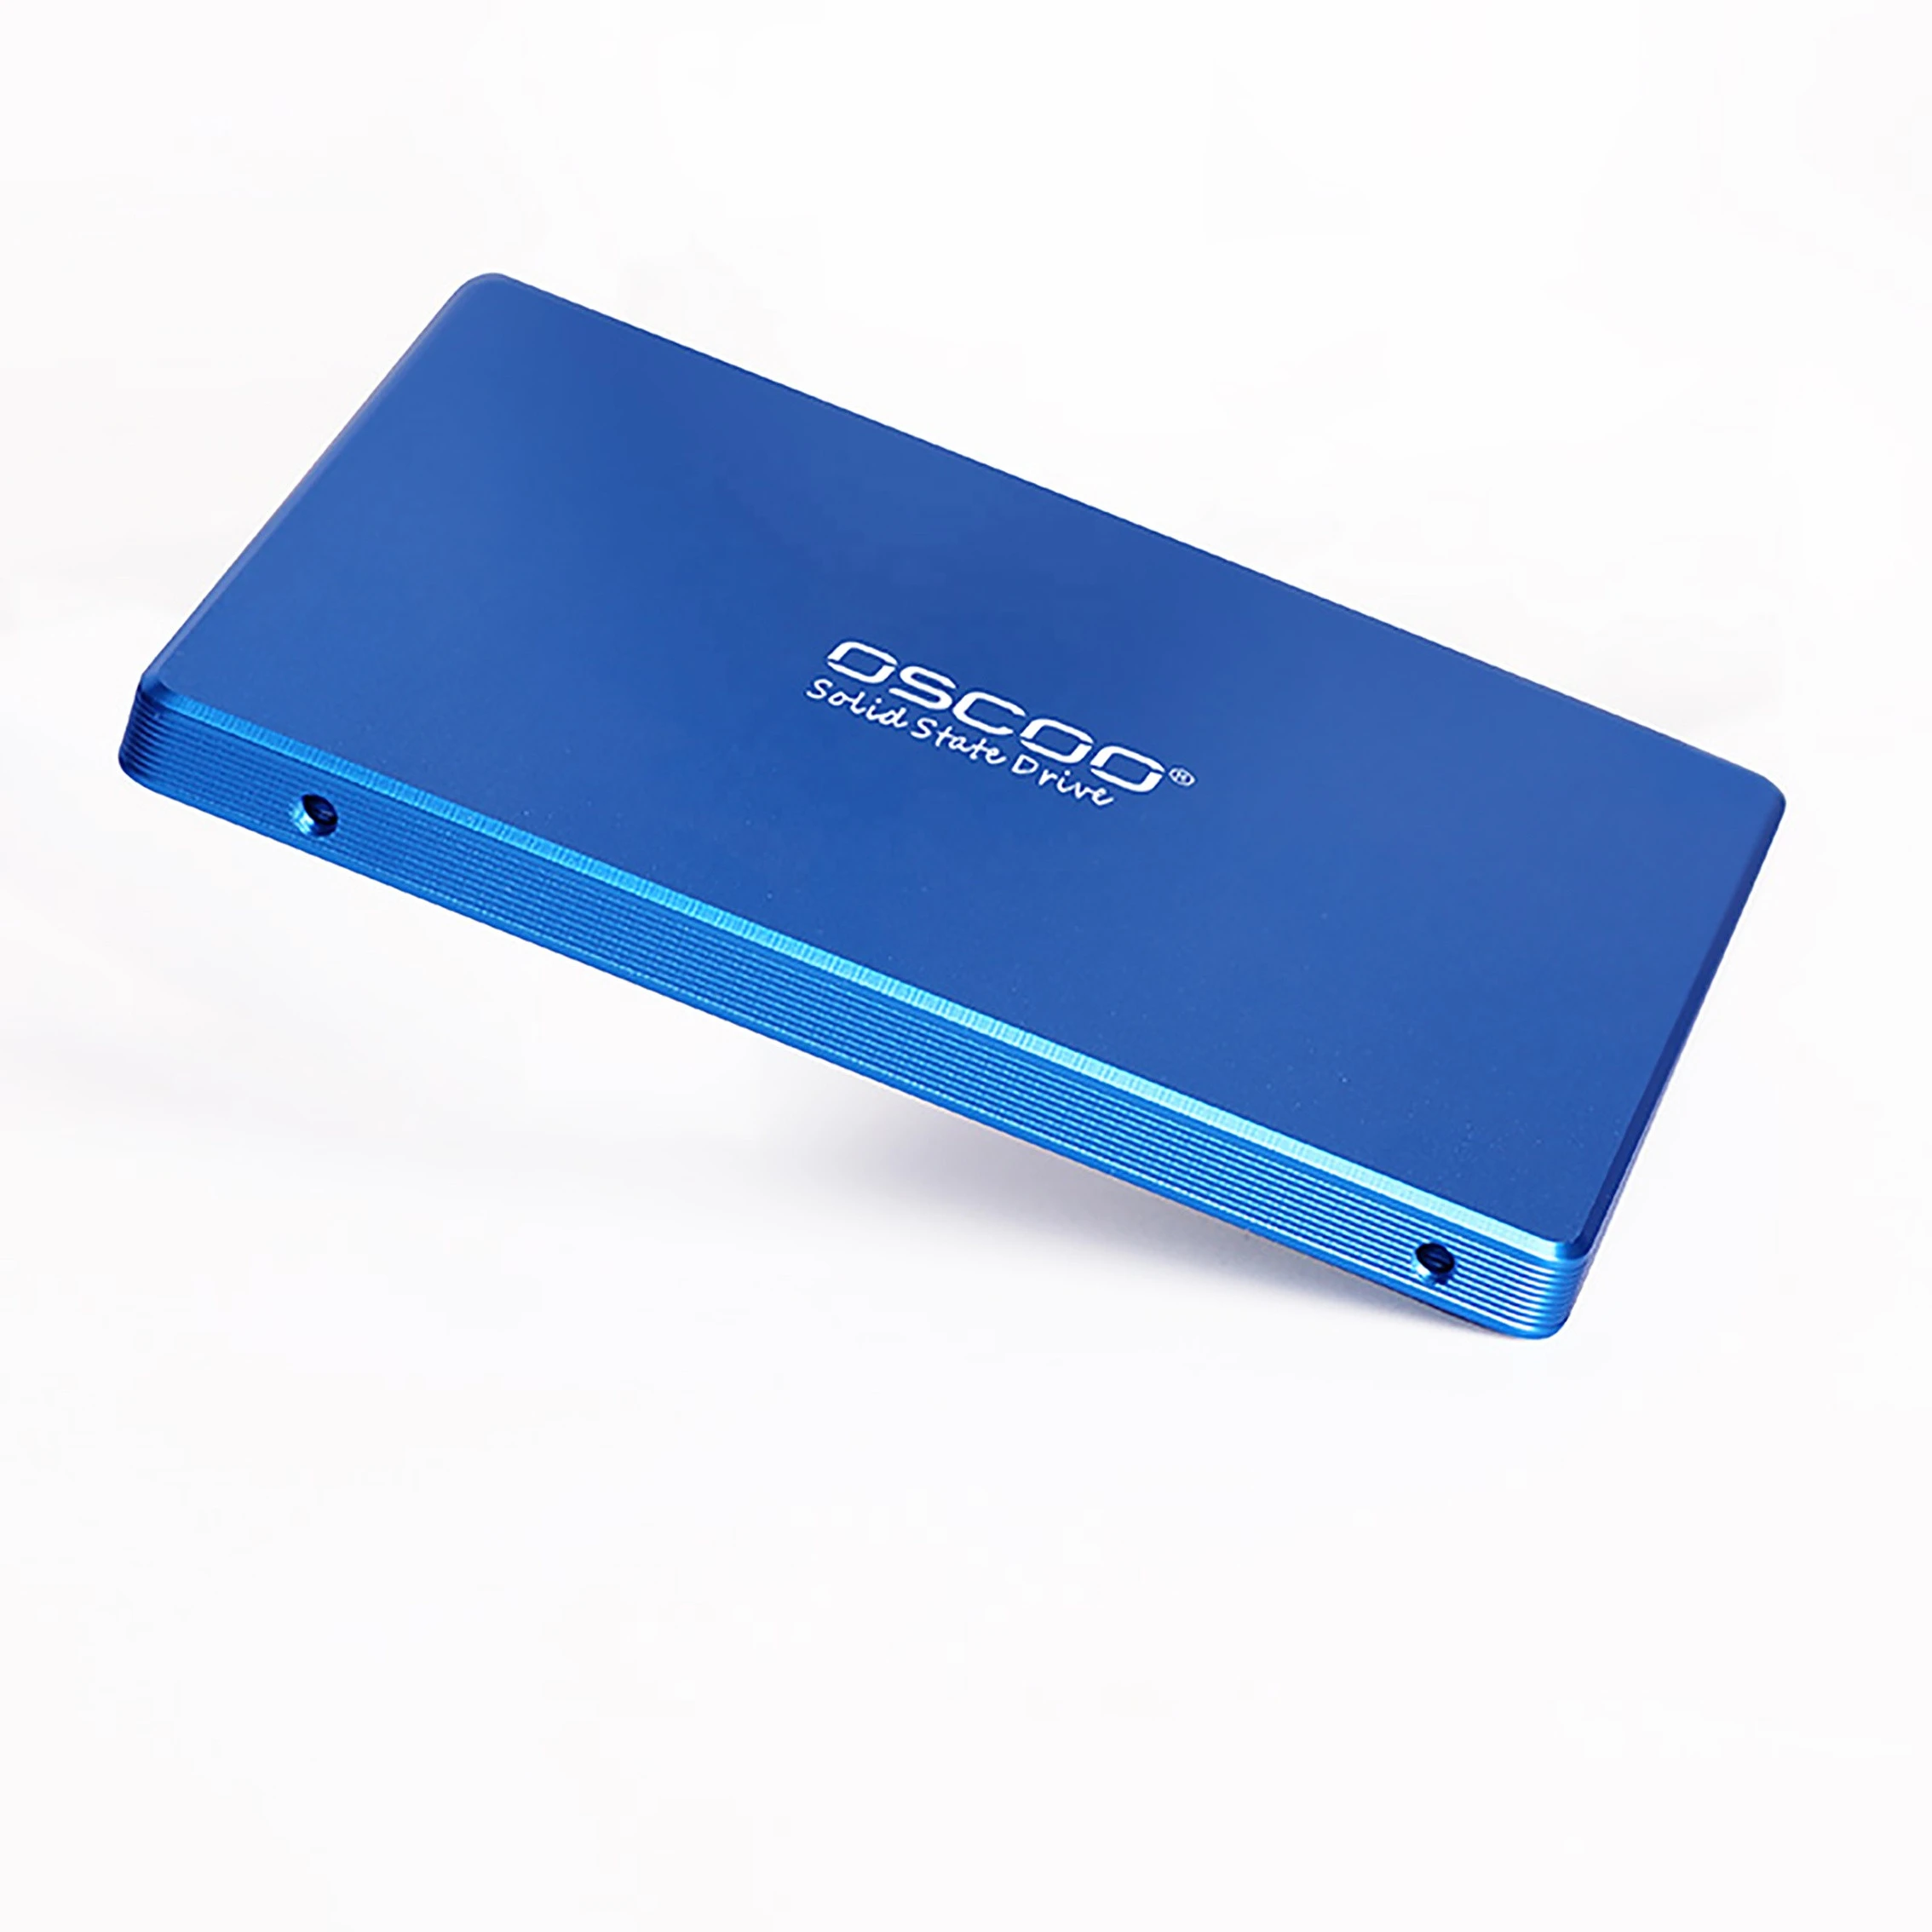 OSCOO SSD Hard Disk Solid State Drive 2.5inch SATA3 Hard Drives 128GB 256GB 512GB 1TB For Desktop Laptop